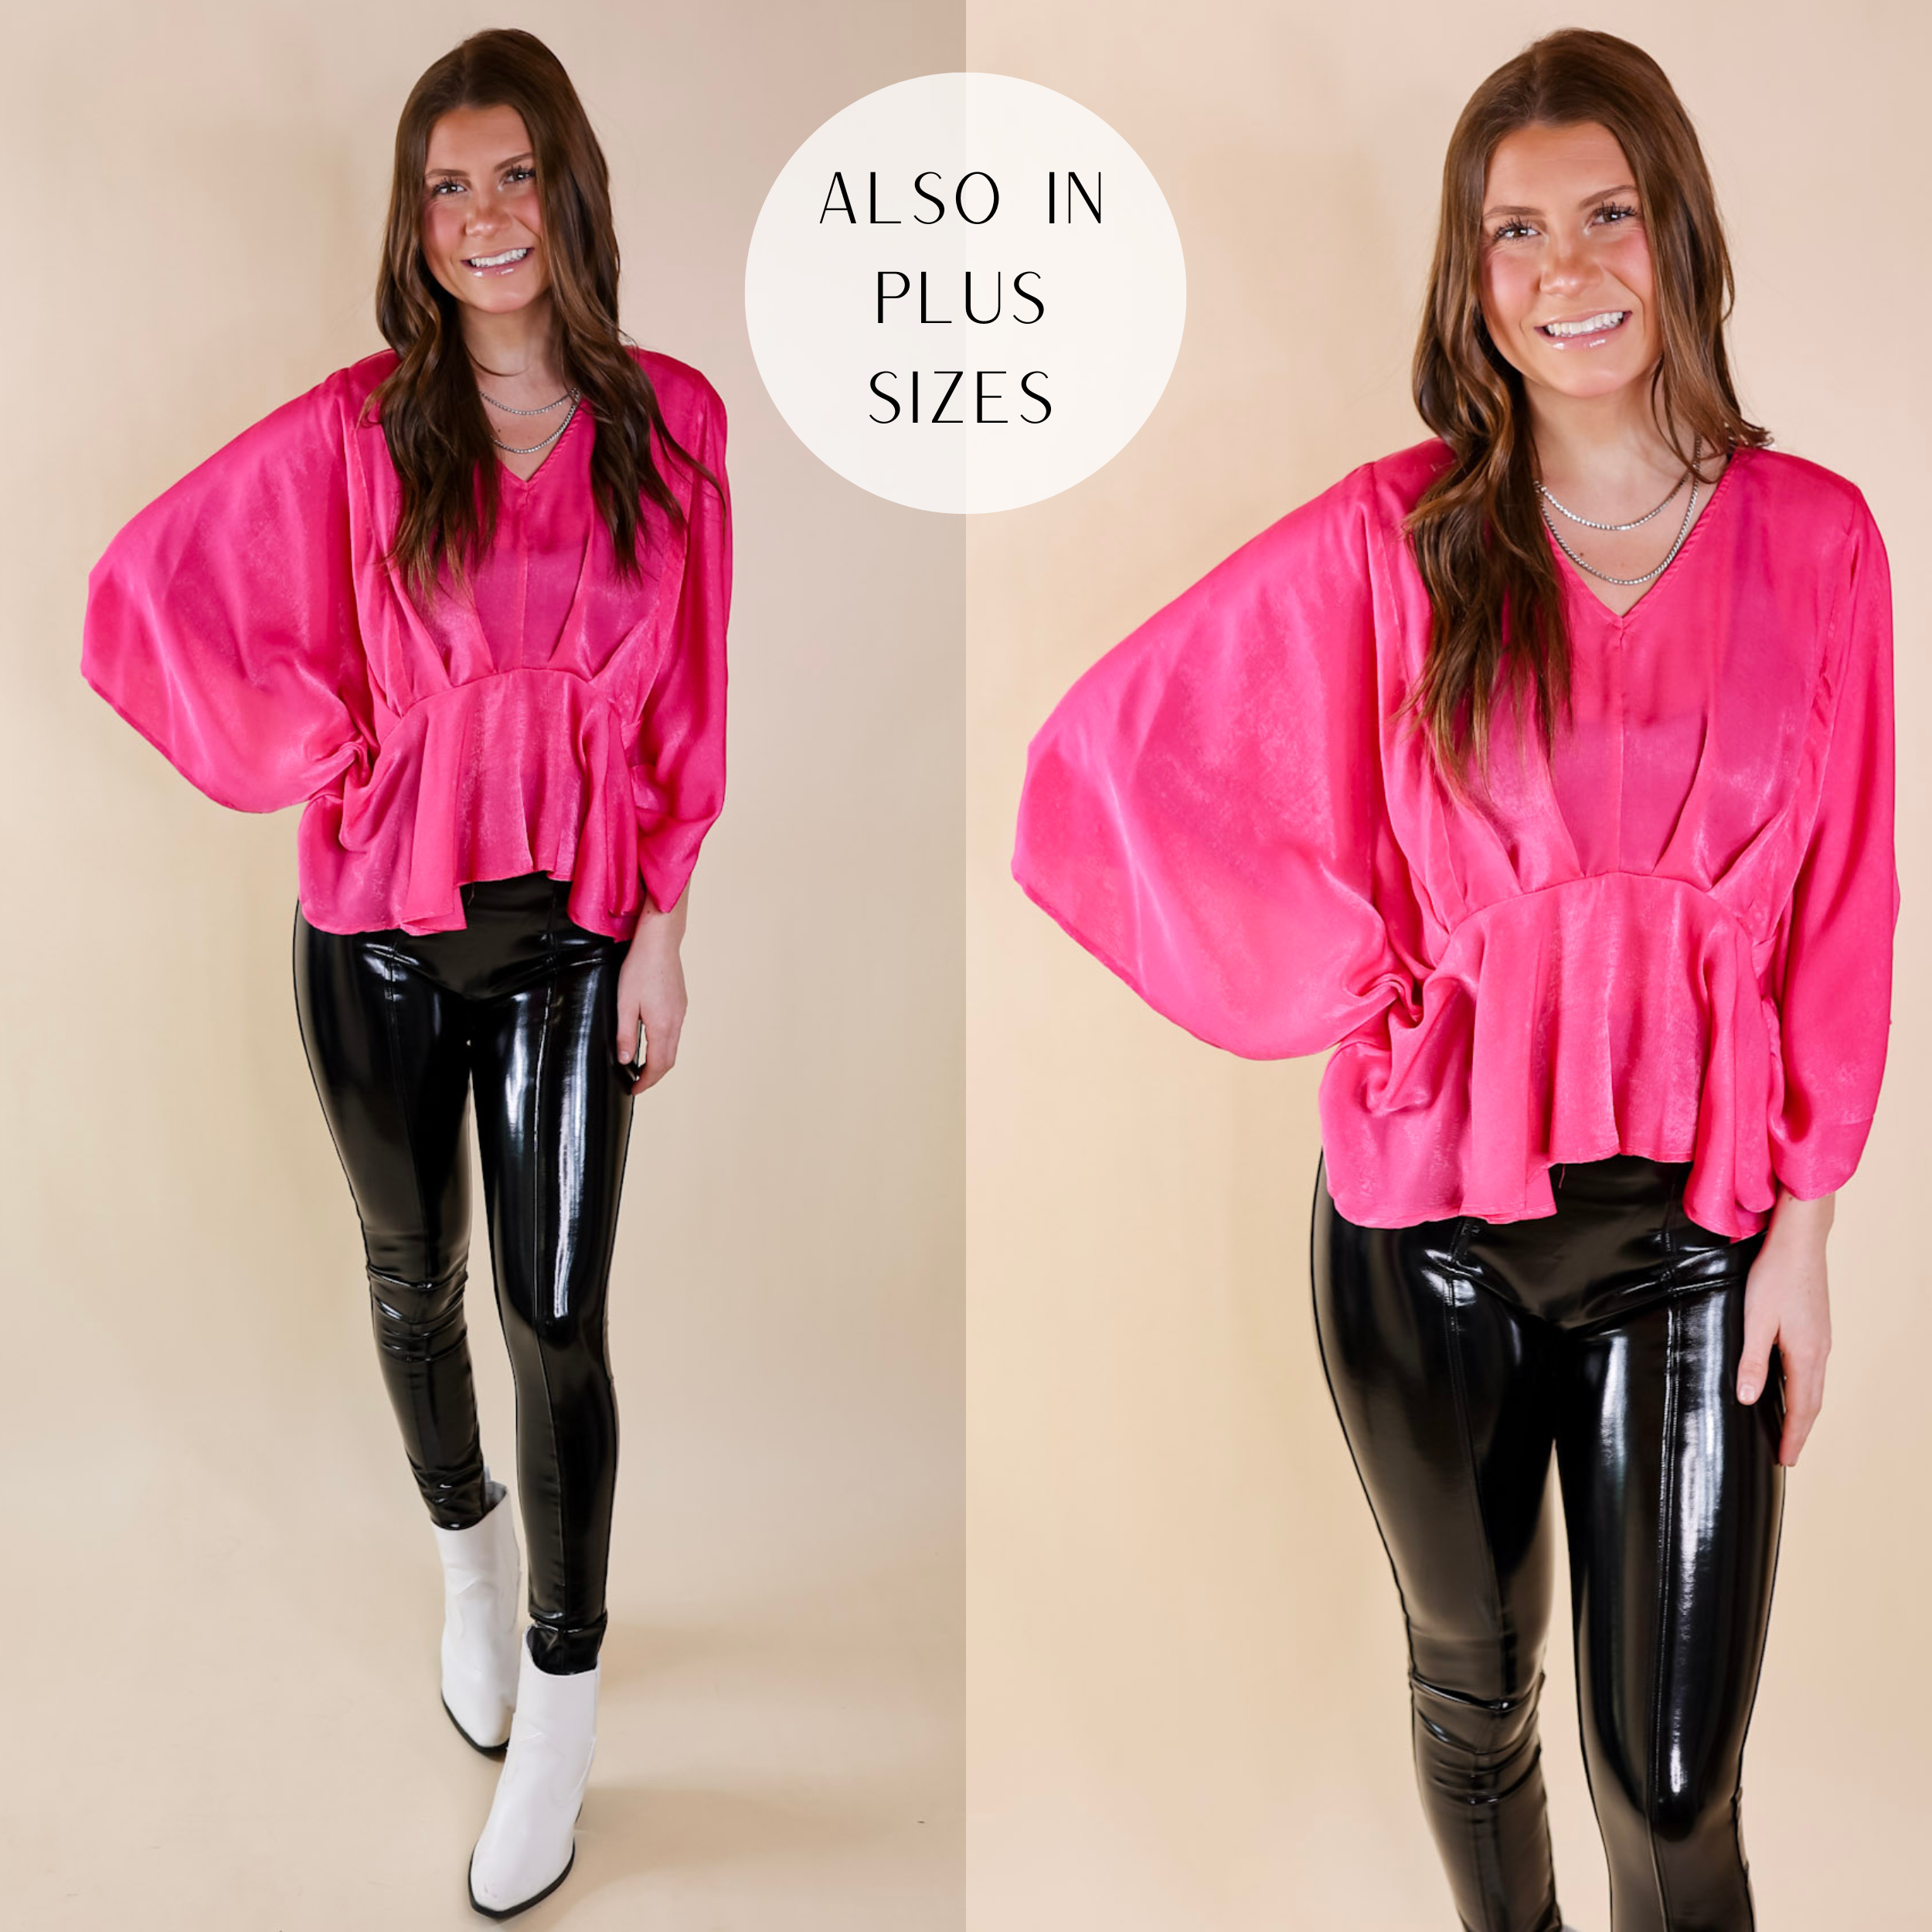 Model is wearing a hot pink satin peplum top with a v neckline and drop sleeves. Model has it paired with patent faux leather leggings, white booties, and silver jewelry.